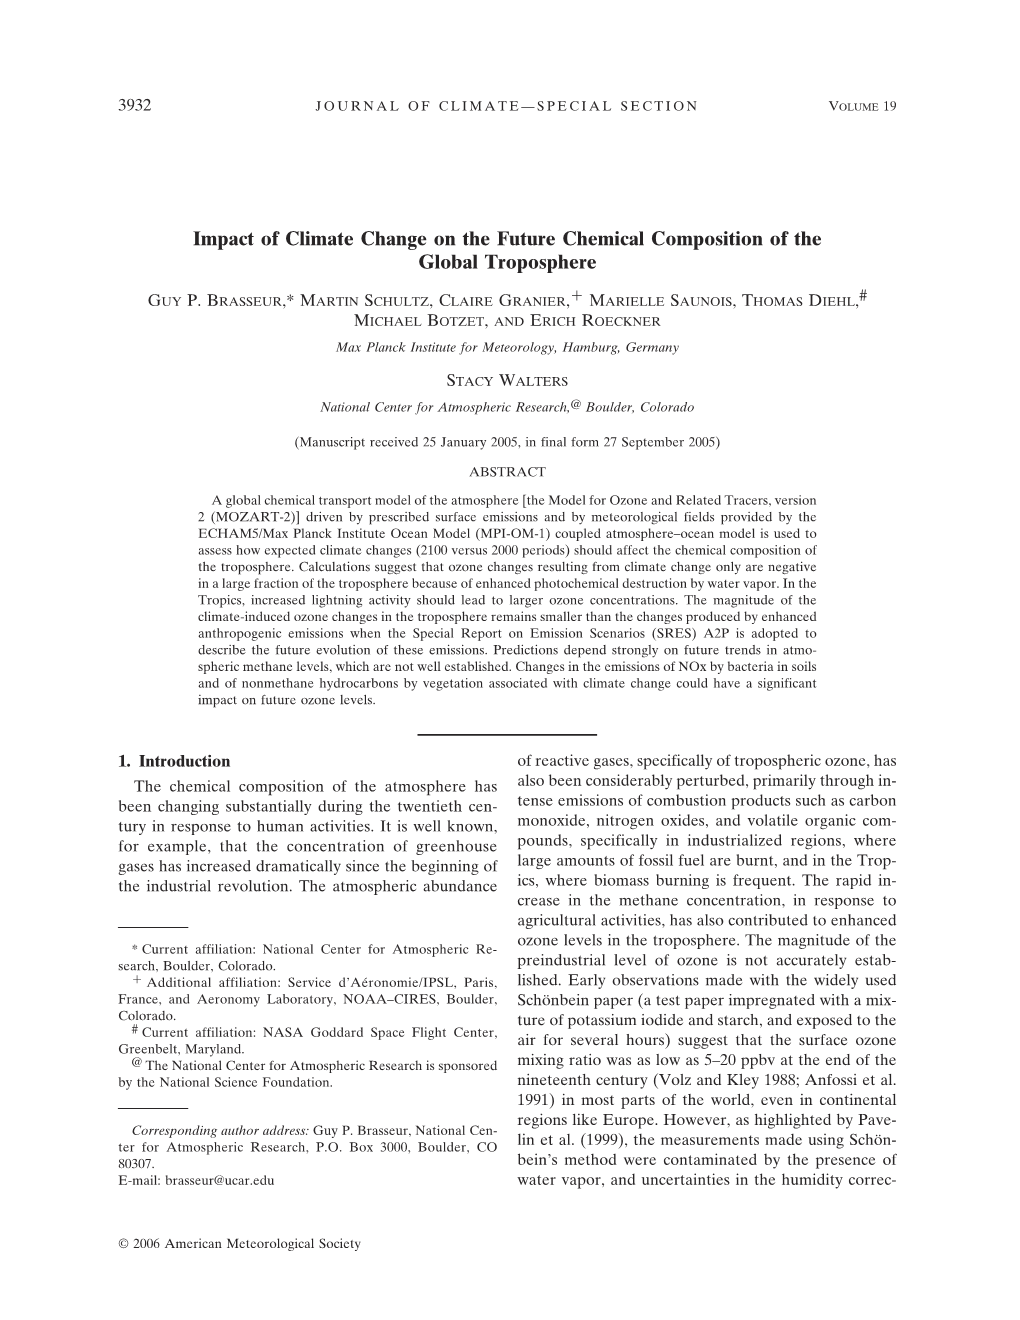 Impact of Climate Change on the Future Chemical Composition of the Global Troposphere Ϩ GUY P